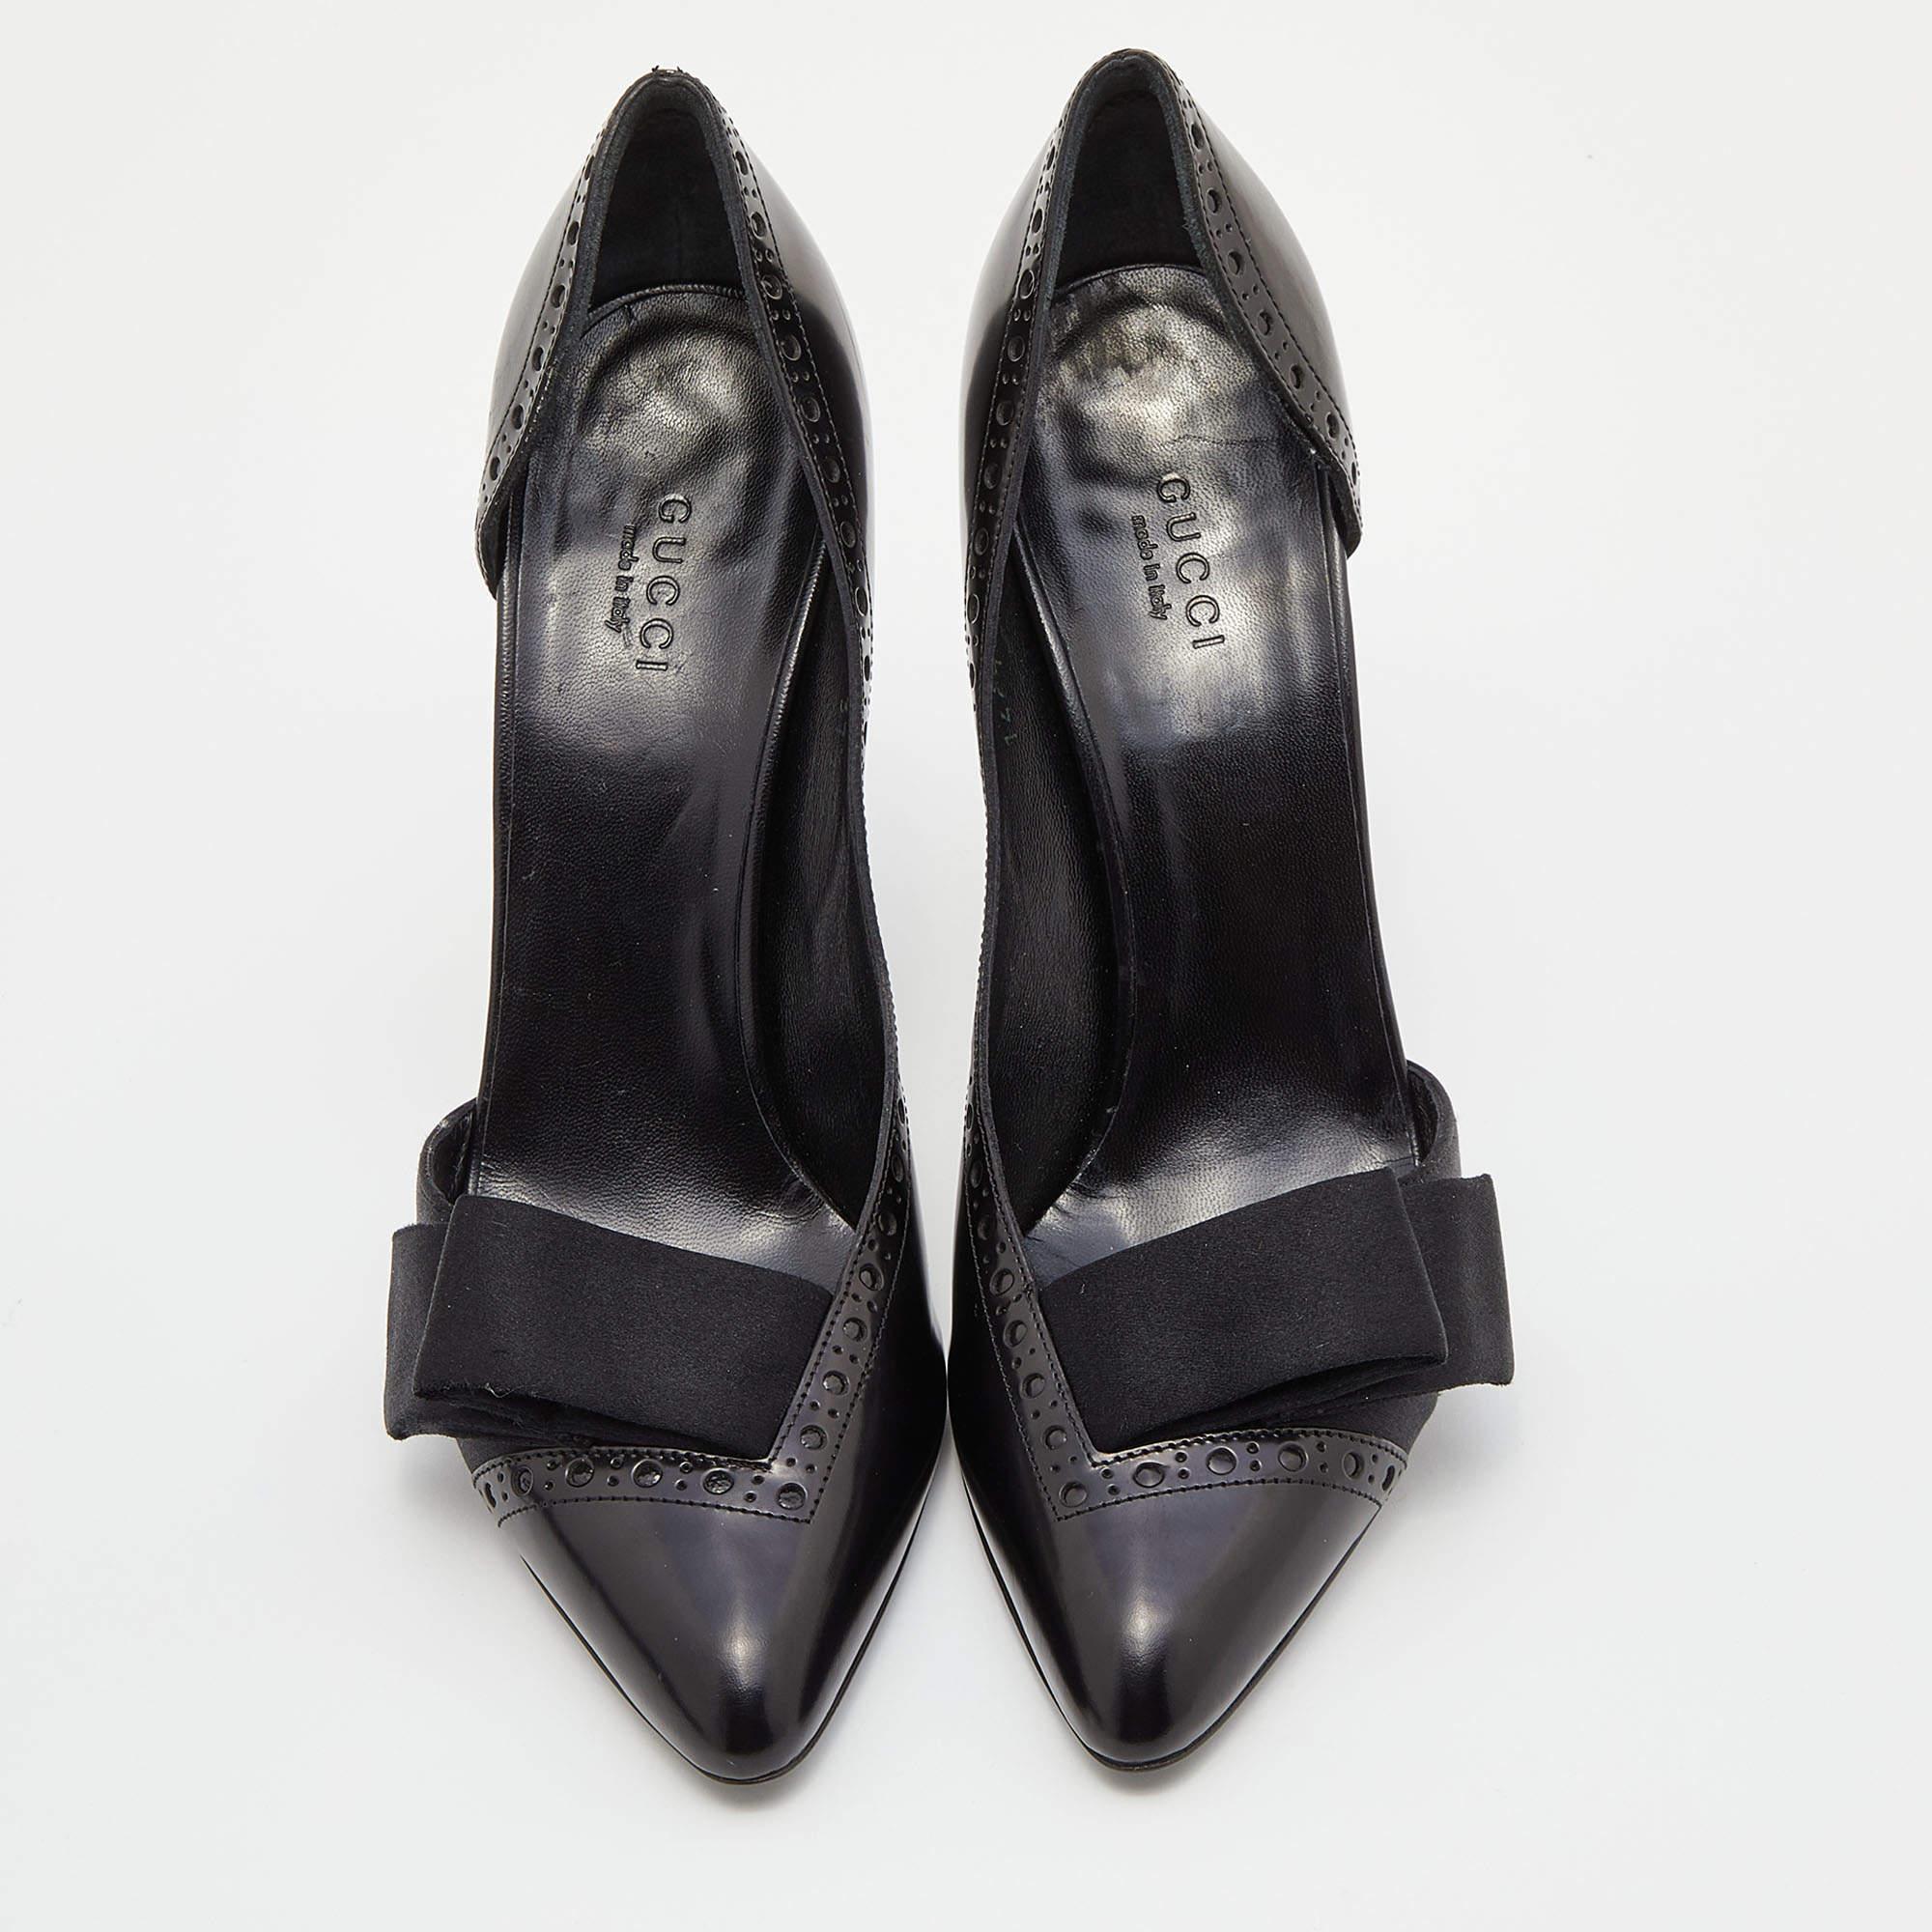 Women's Gucci Black Leather and Satin Bow D'orsay Pumps Size 37.5